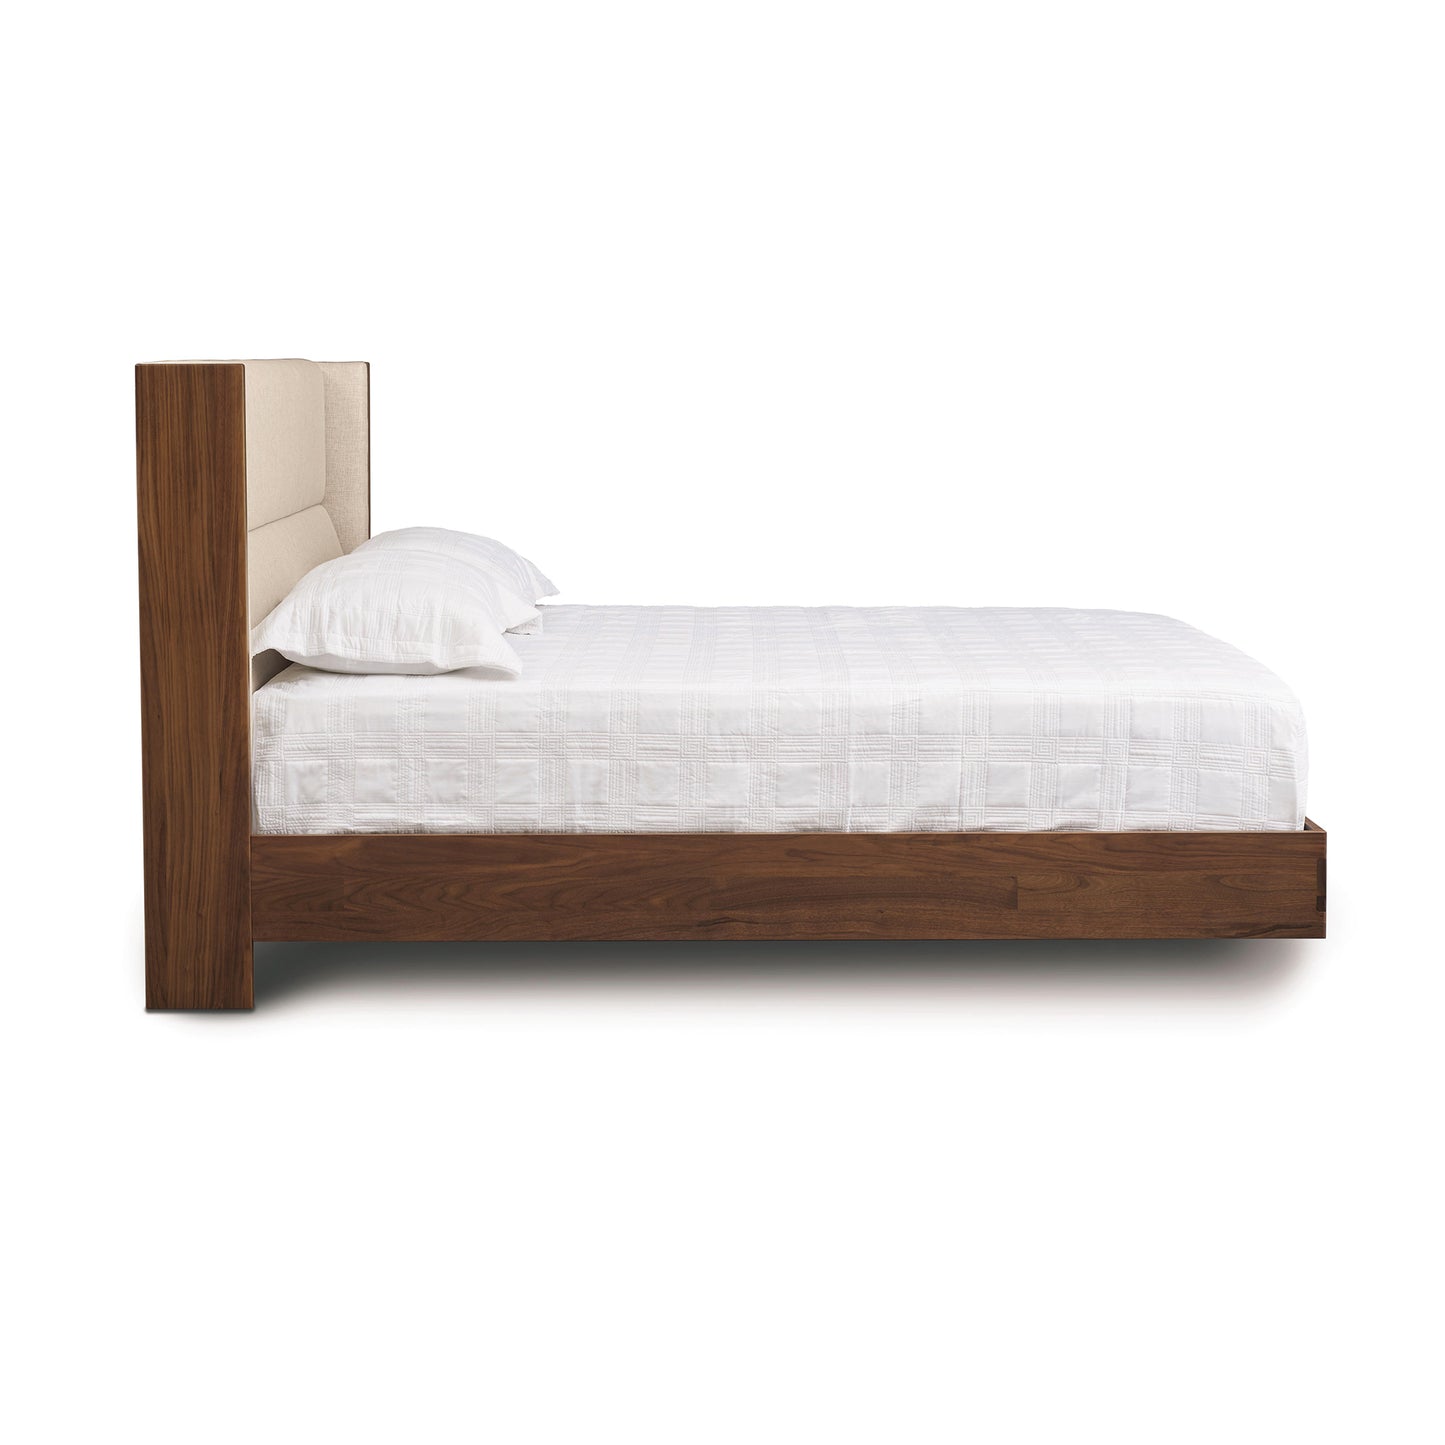 A bed with a wooden headboard and footboard, featuring a Sloane Floating Bed by Copeland Furniture.